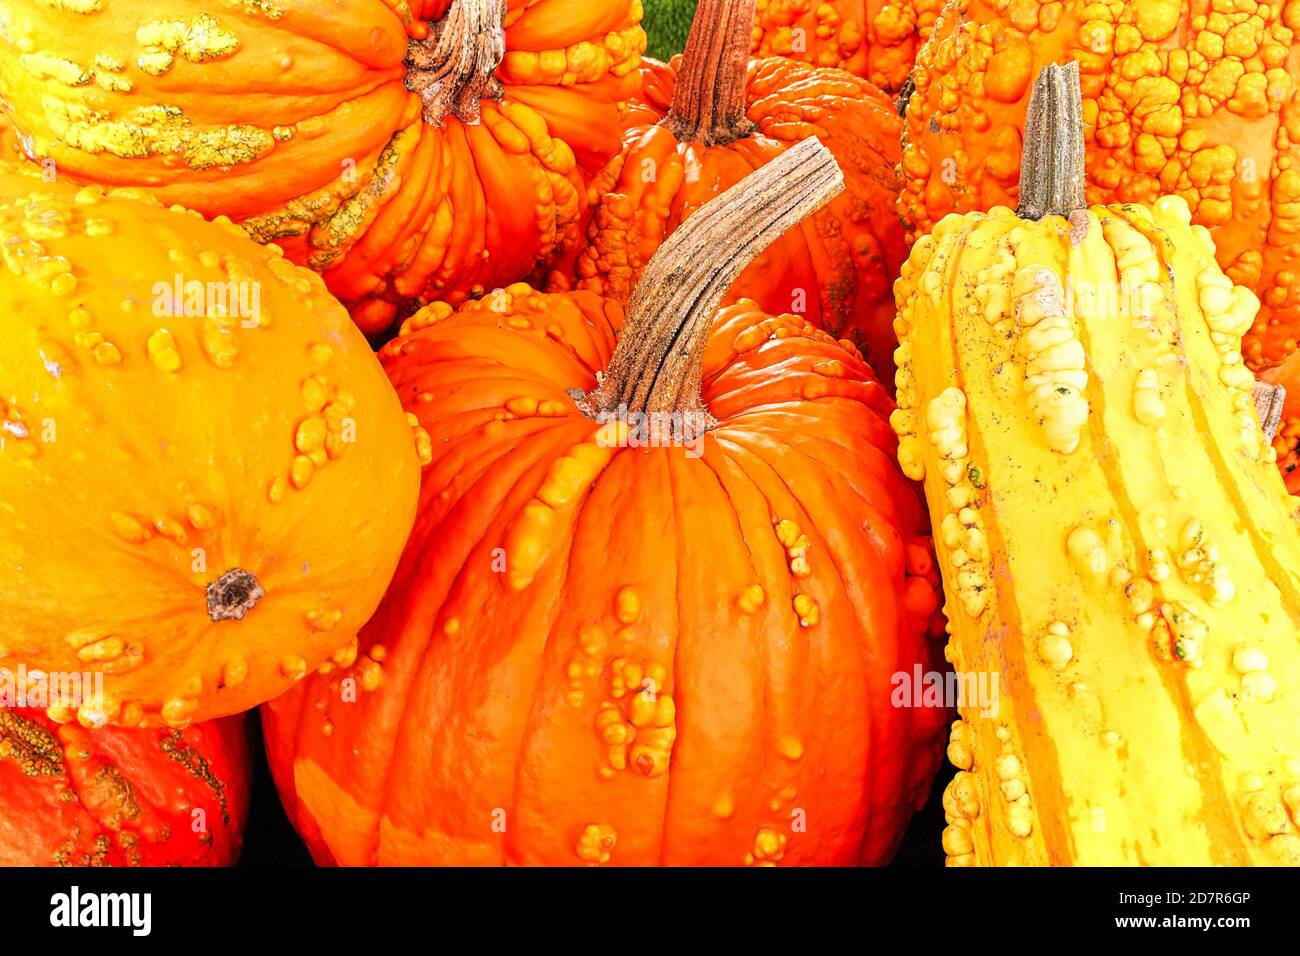 A background of various bumpy warty pumpkins and squashes Stock Photo